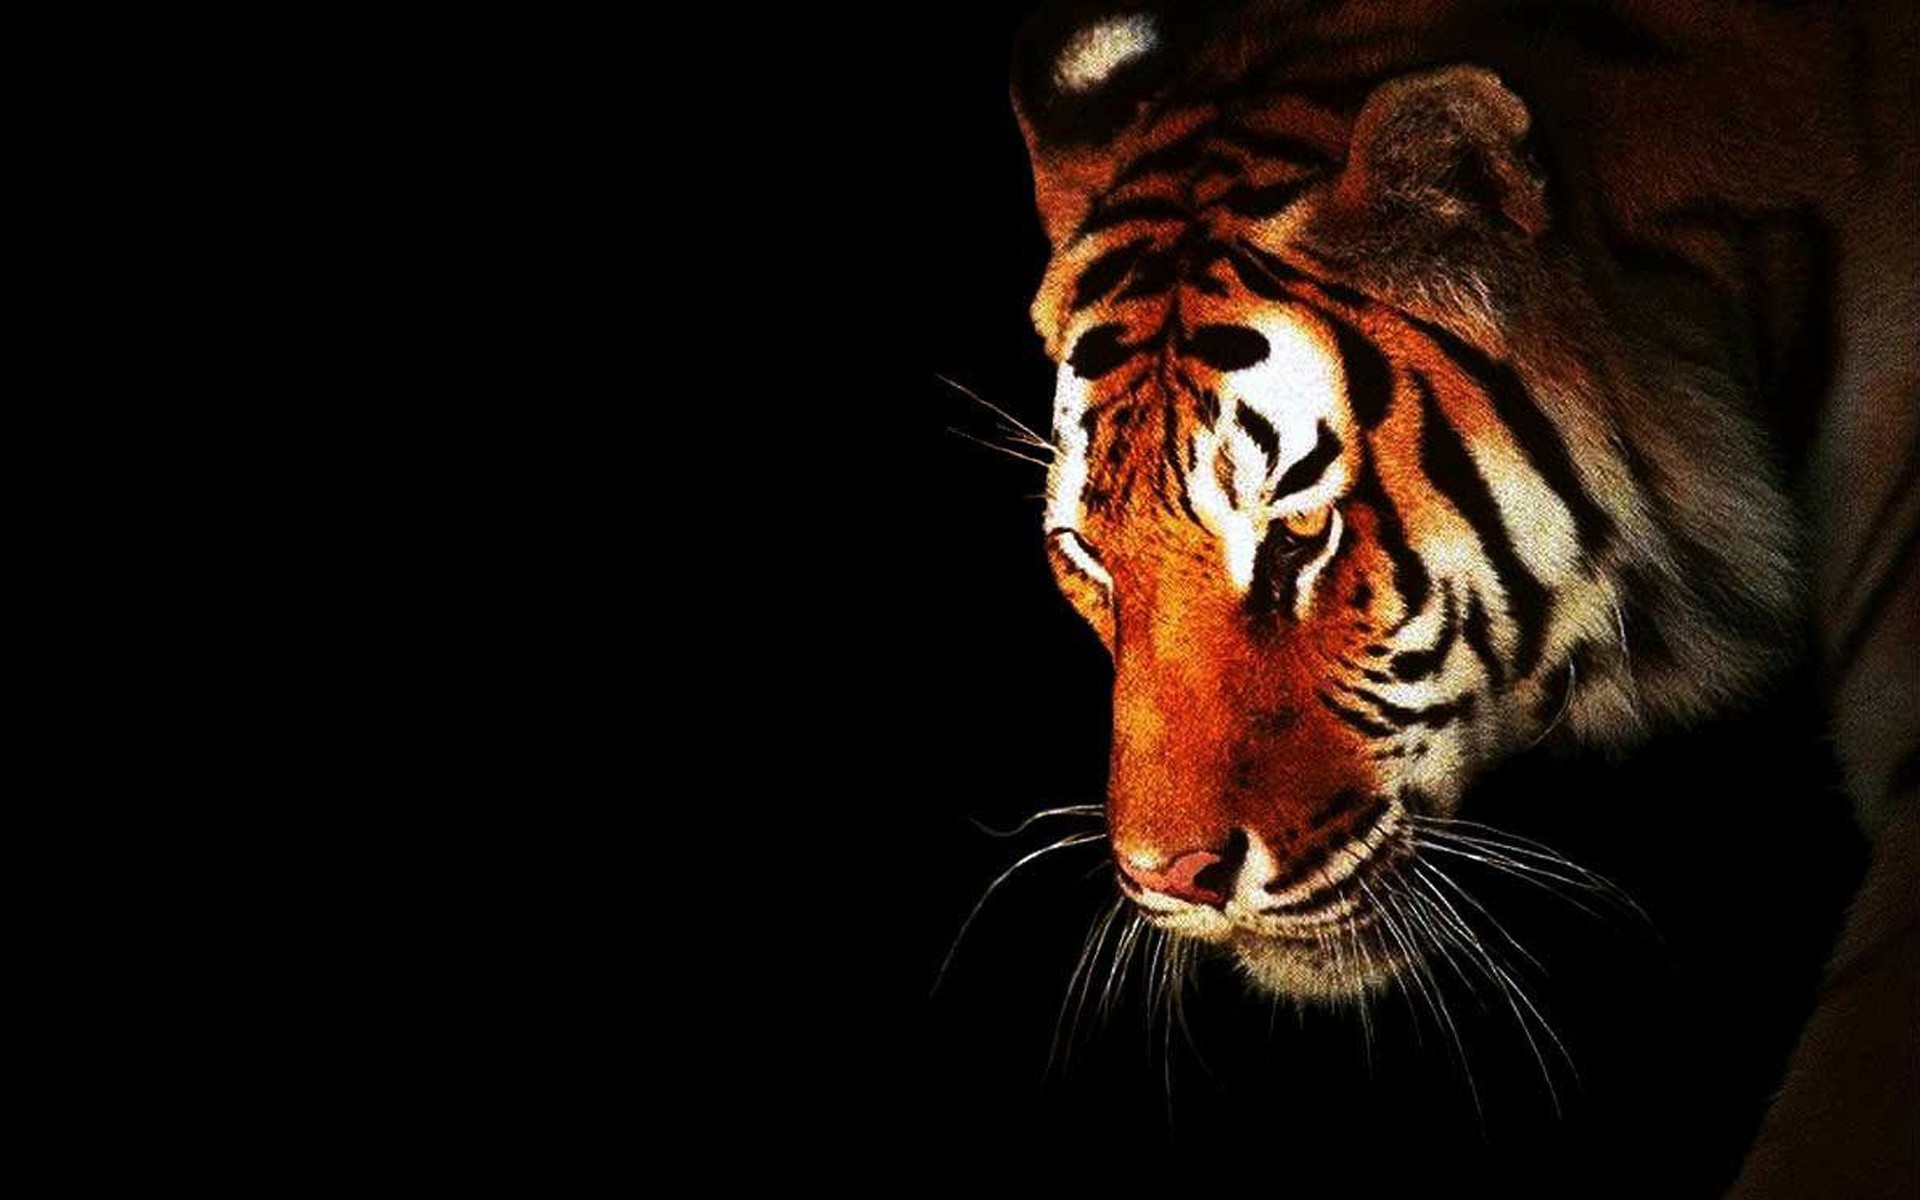 Black Tiger HD Wallpaper On A Background